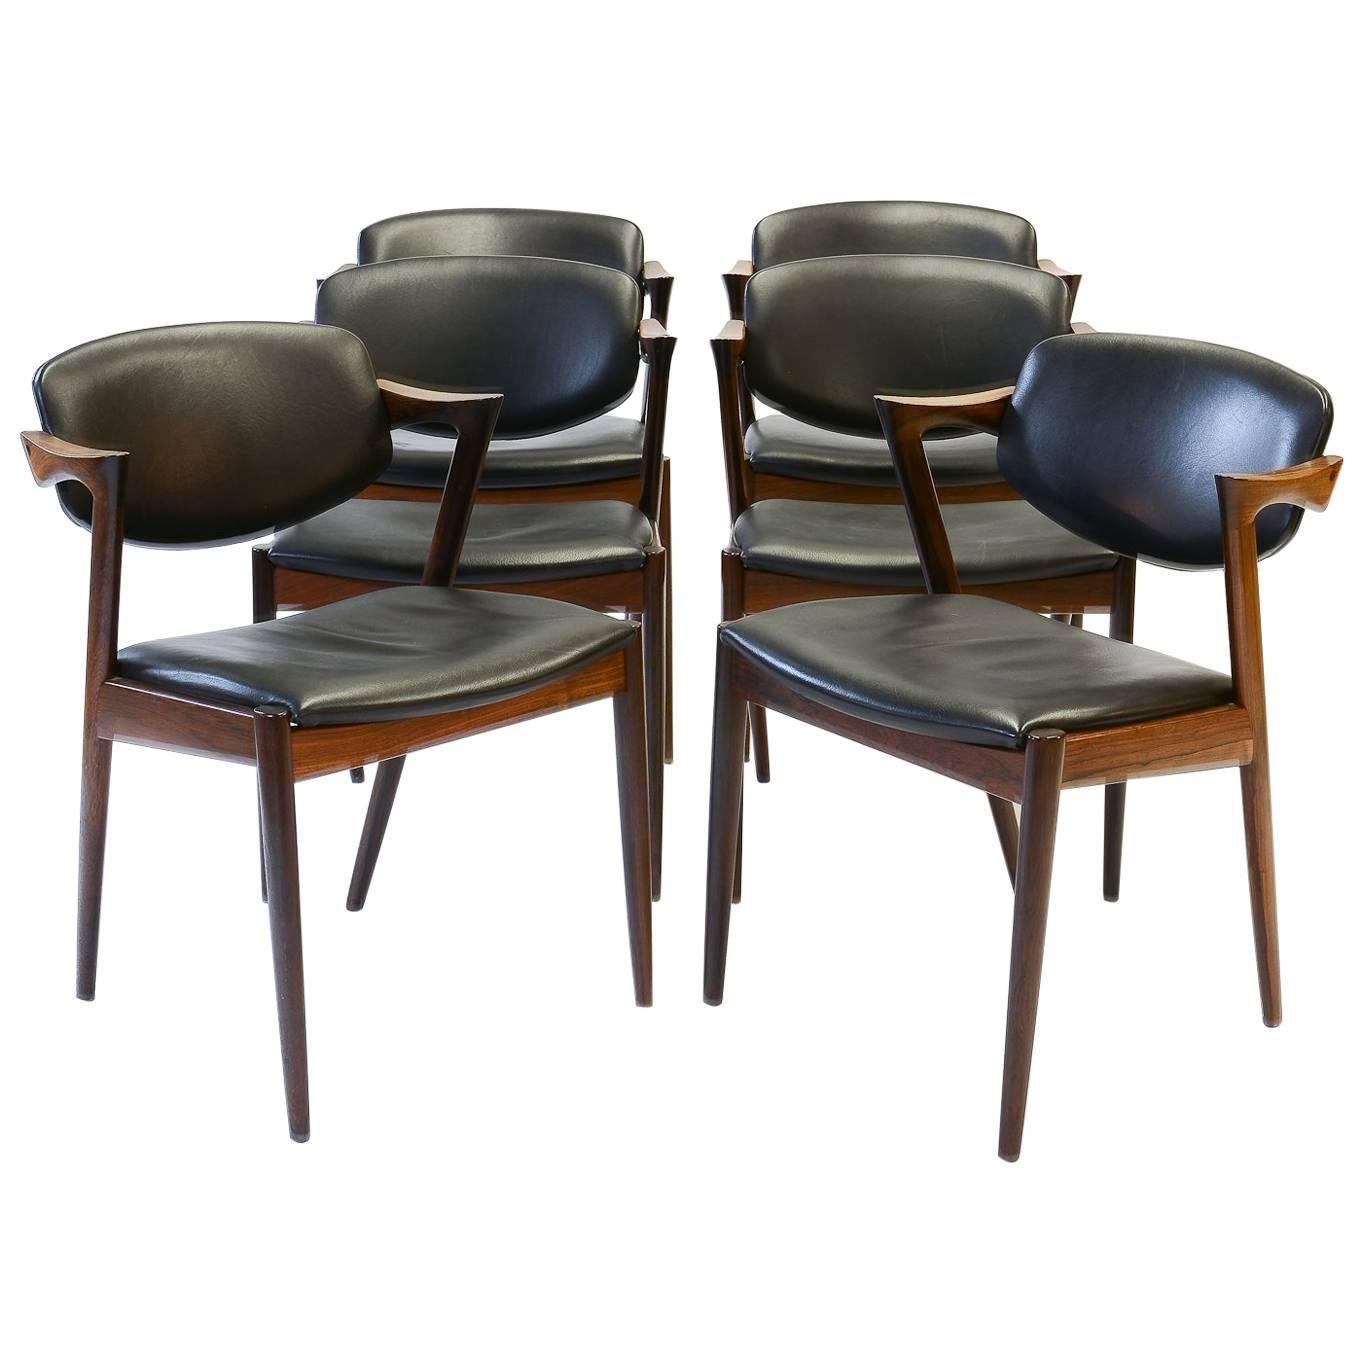 Six Kai Kristiansen 'Model 42' Dining Chairs in Rosewood & Black Saddle Leather